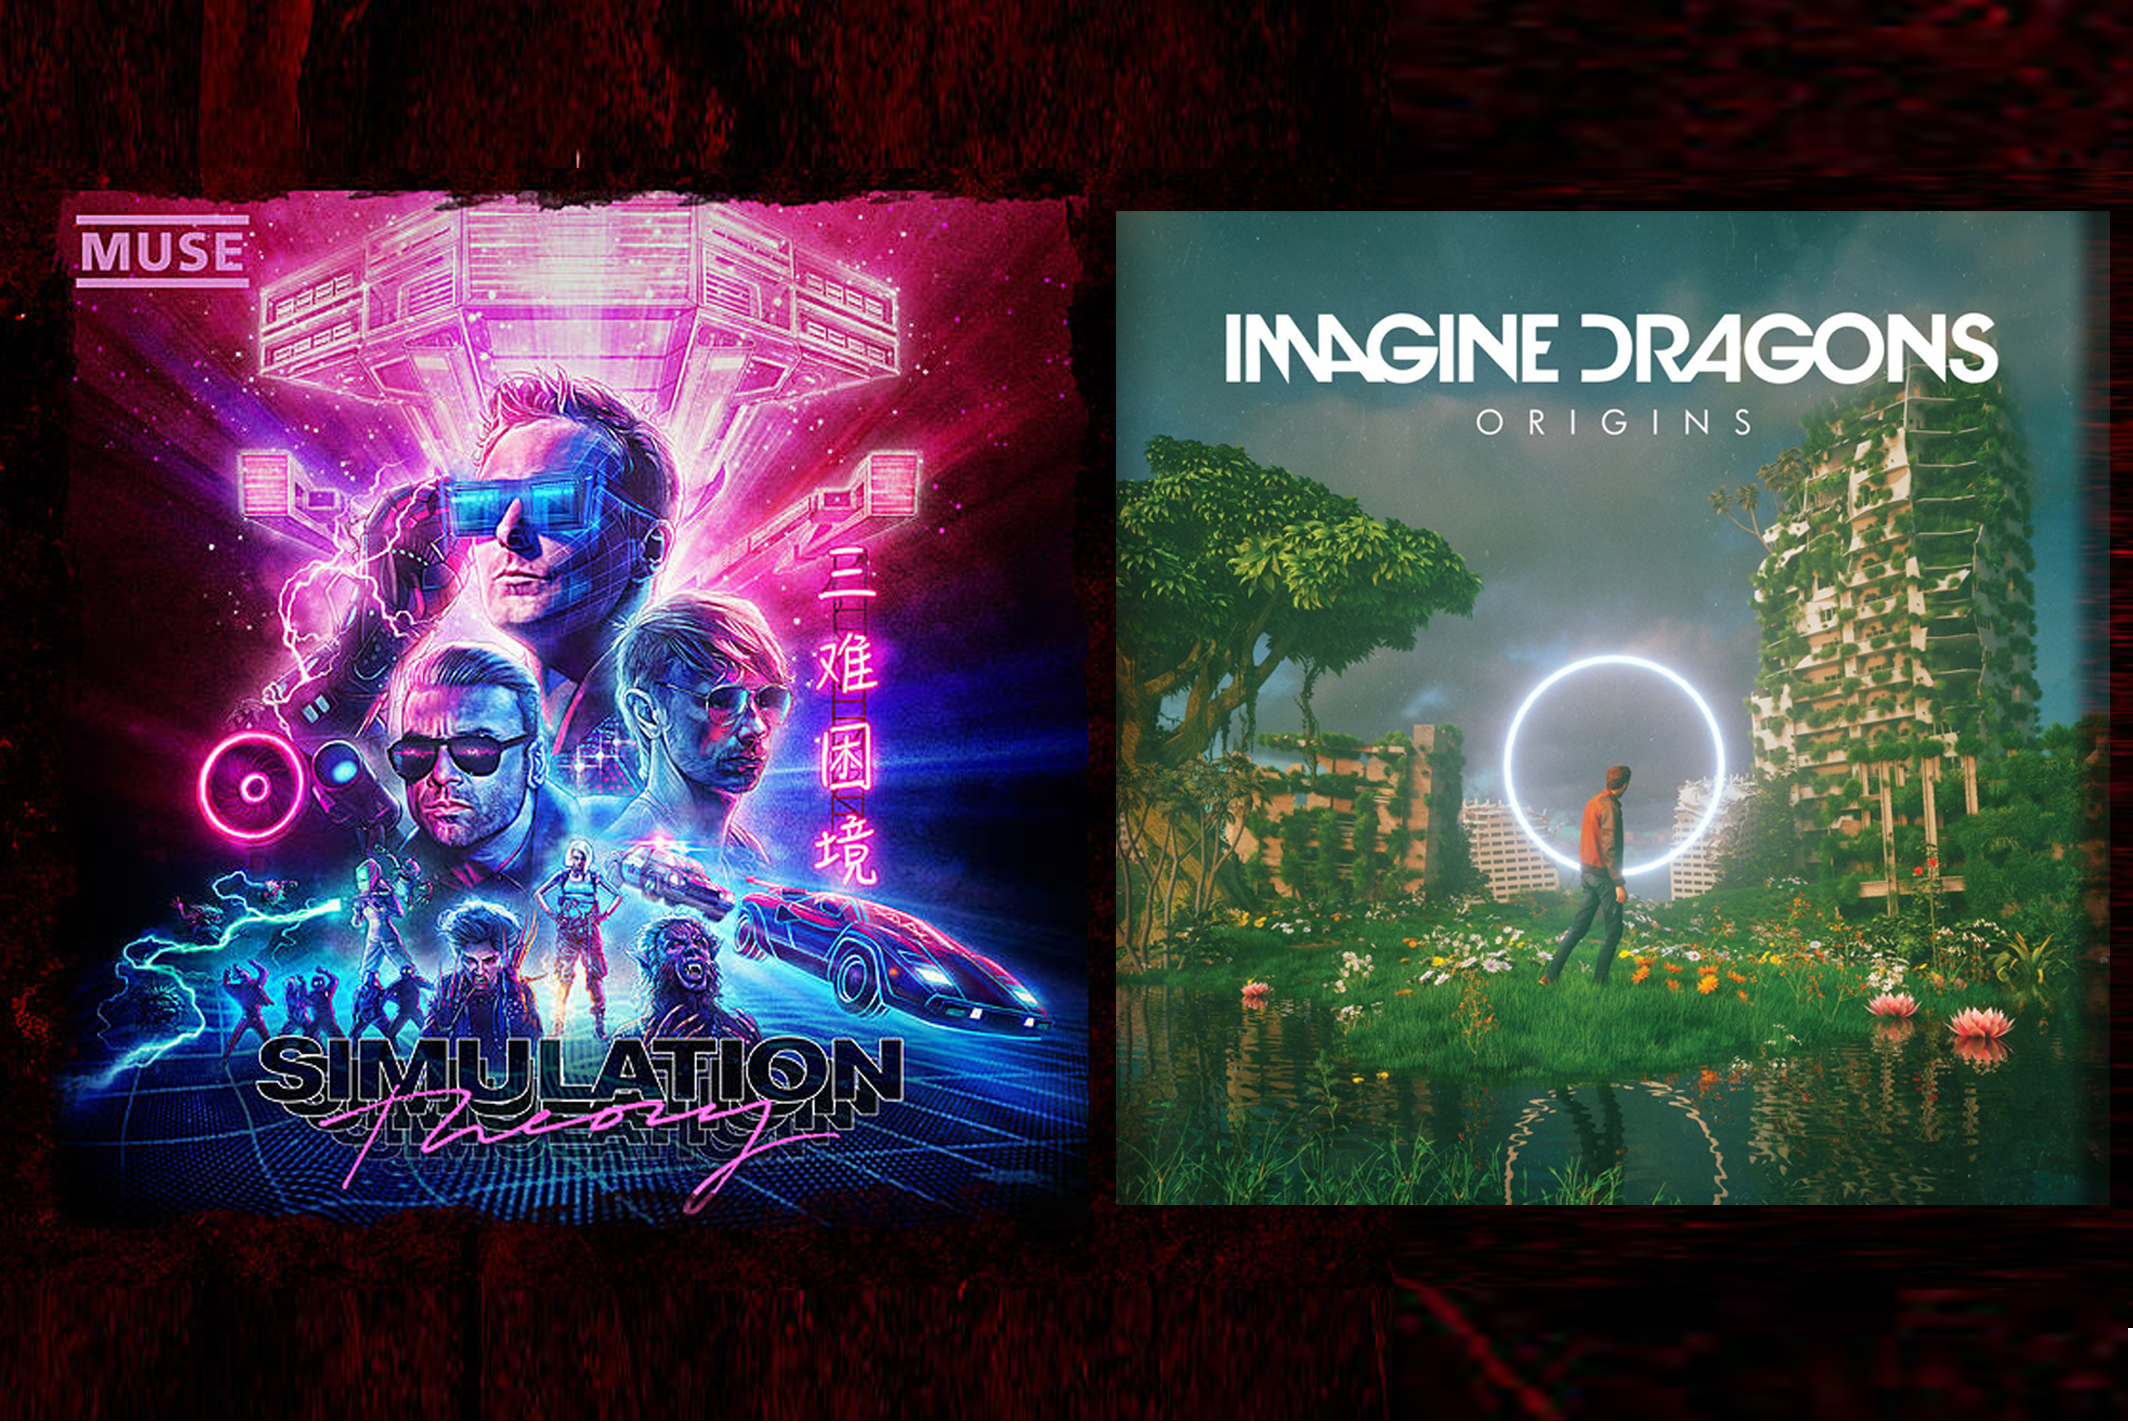 Muse, Imagine Dragons, covers